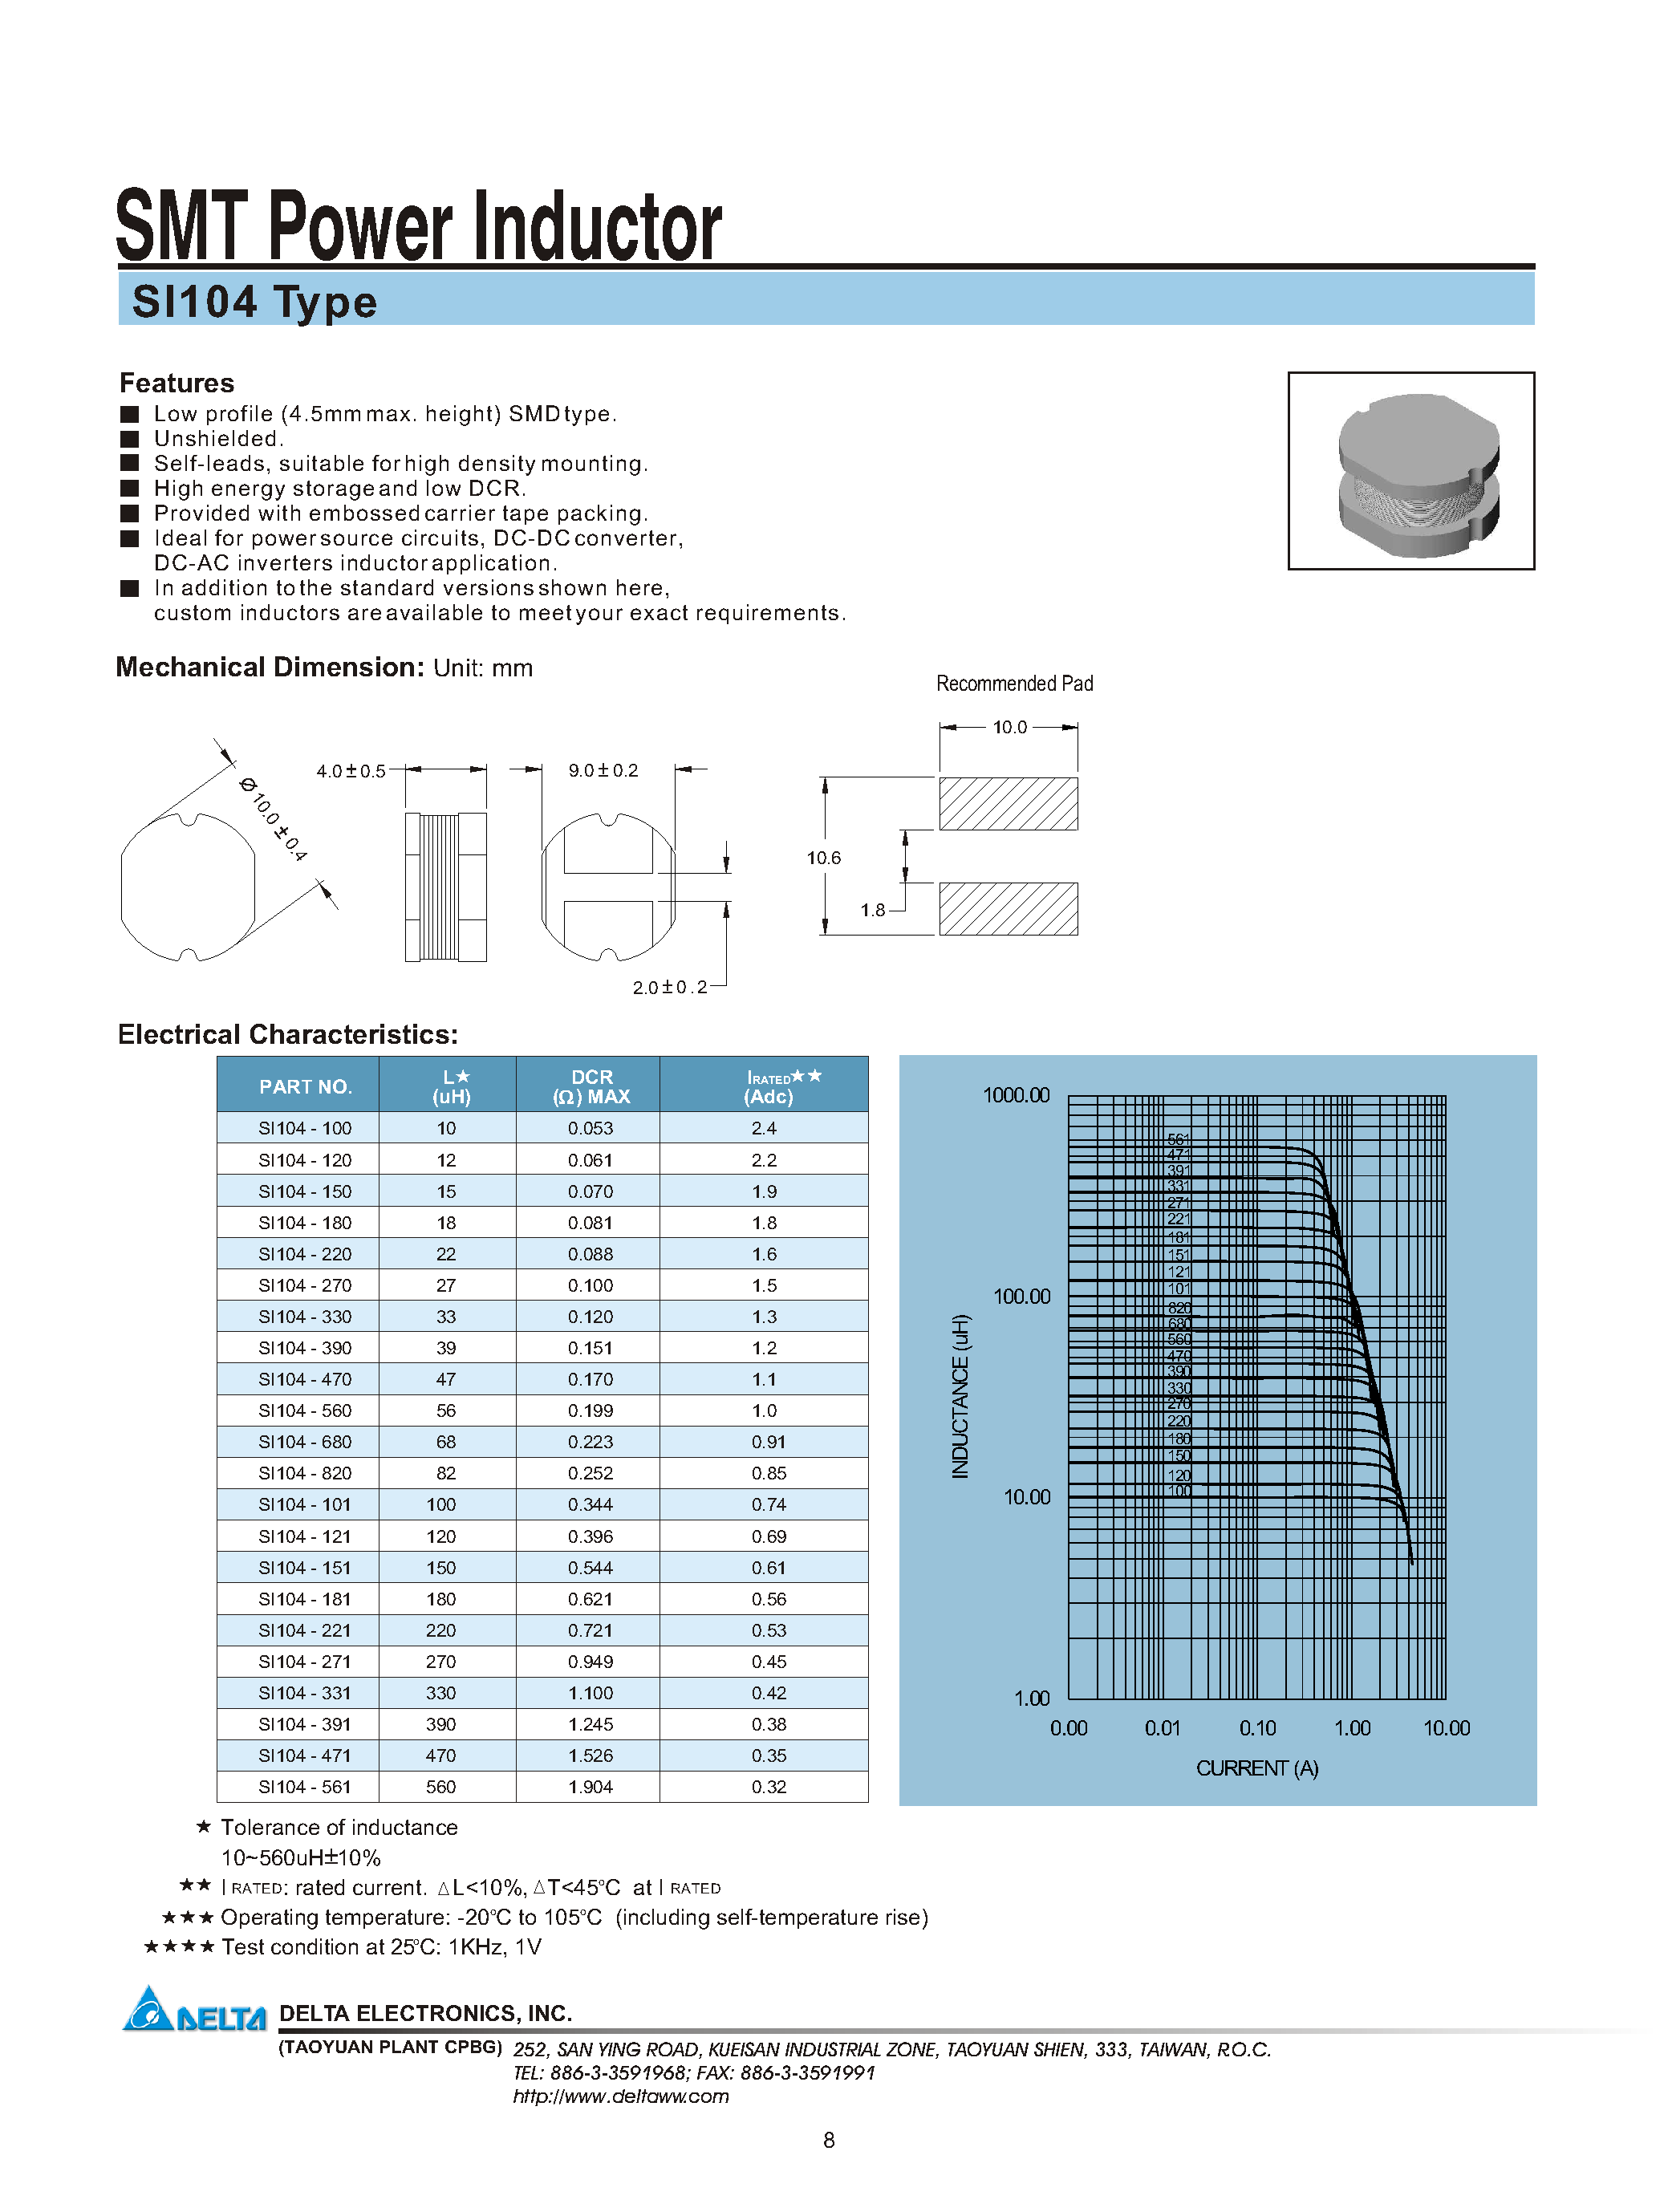 Datasheet SI104-180 - SMT Power Inductor page 1